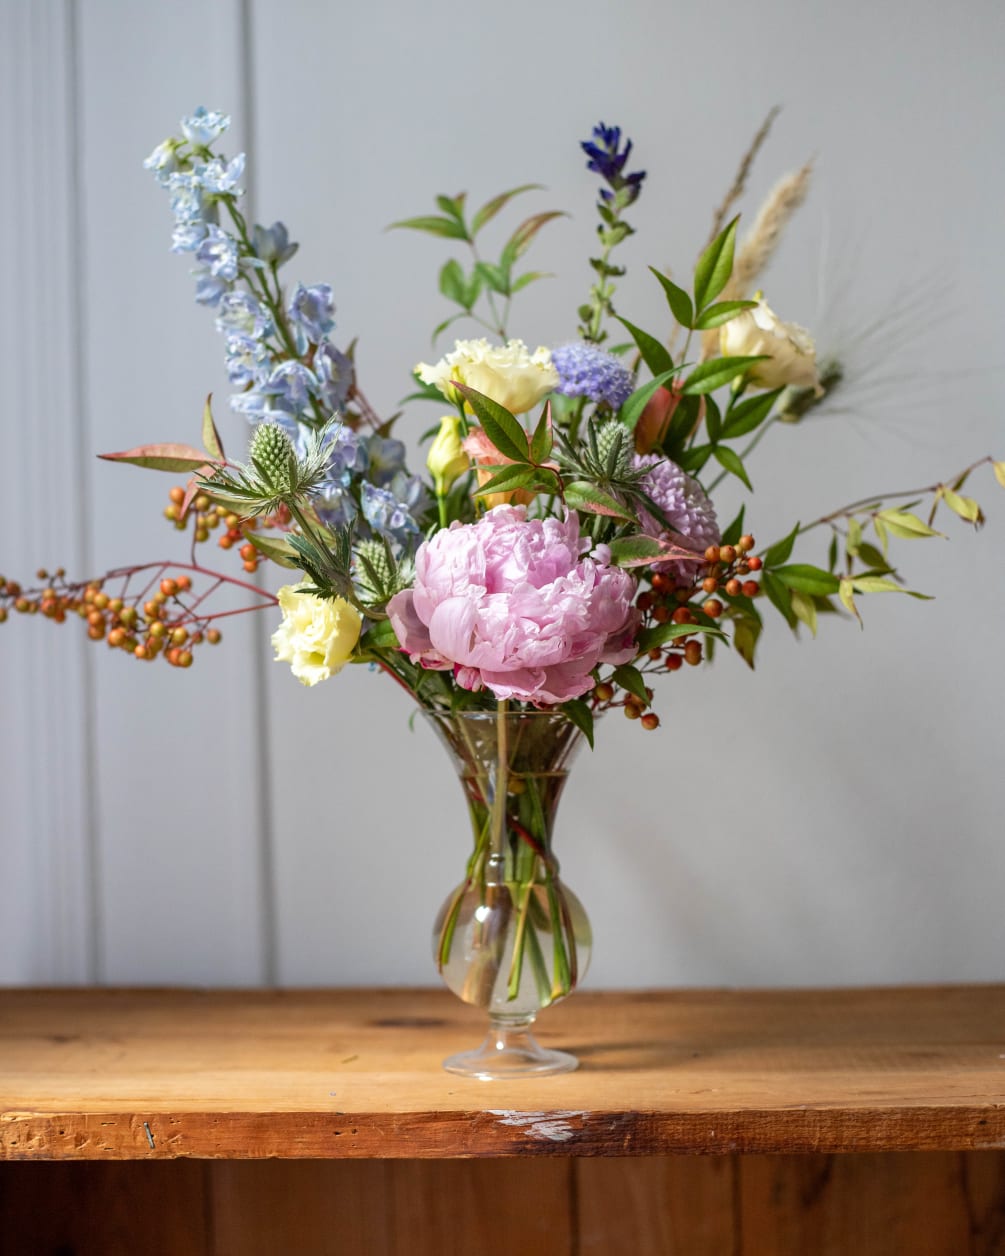 Premium floral arrangement designed with the highest quality flowers in white, pink